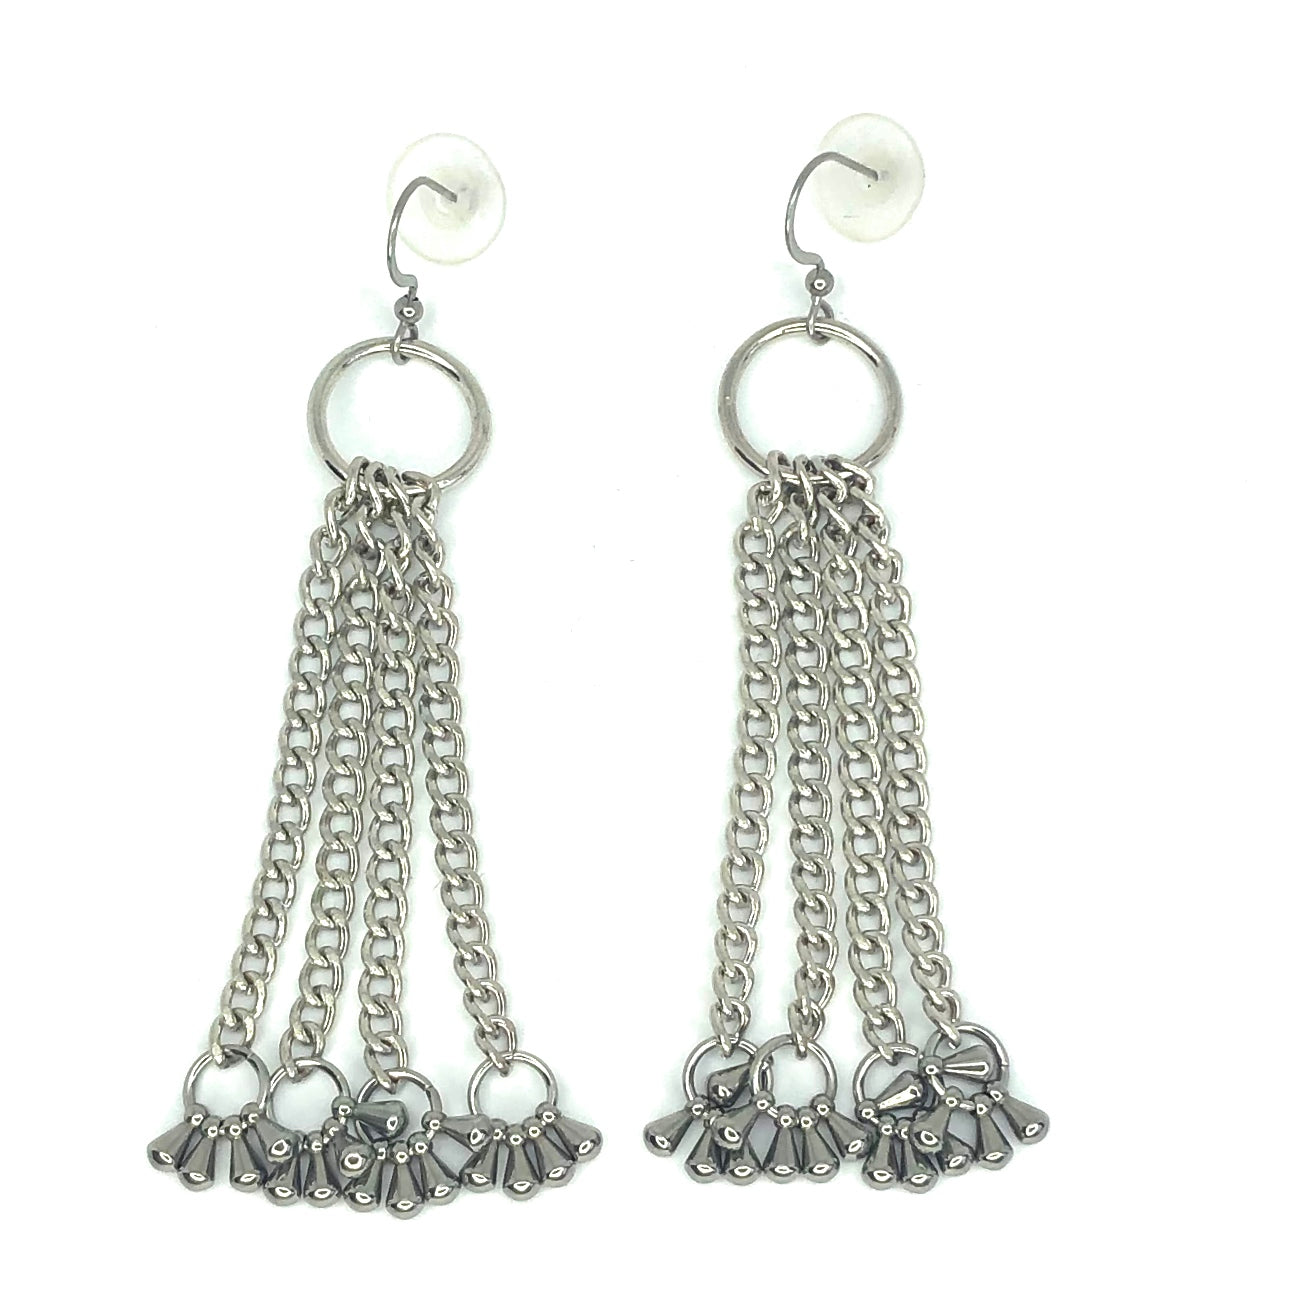 CHAIN EARRINGS WITH CLUSTER OF TEAR DROPS BY NYET JEWELRY.